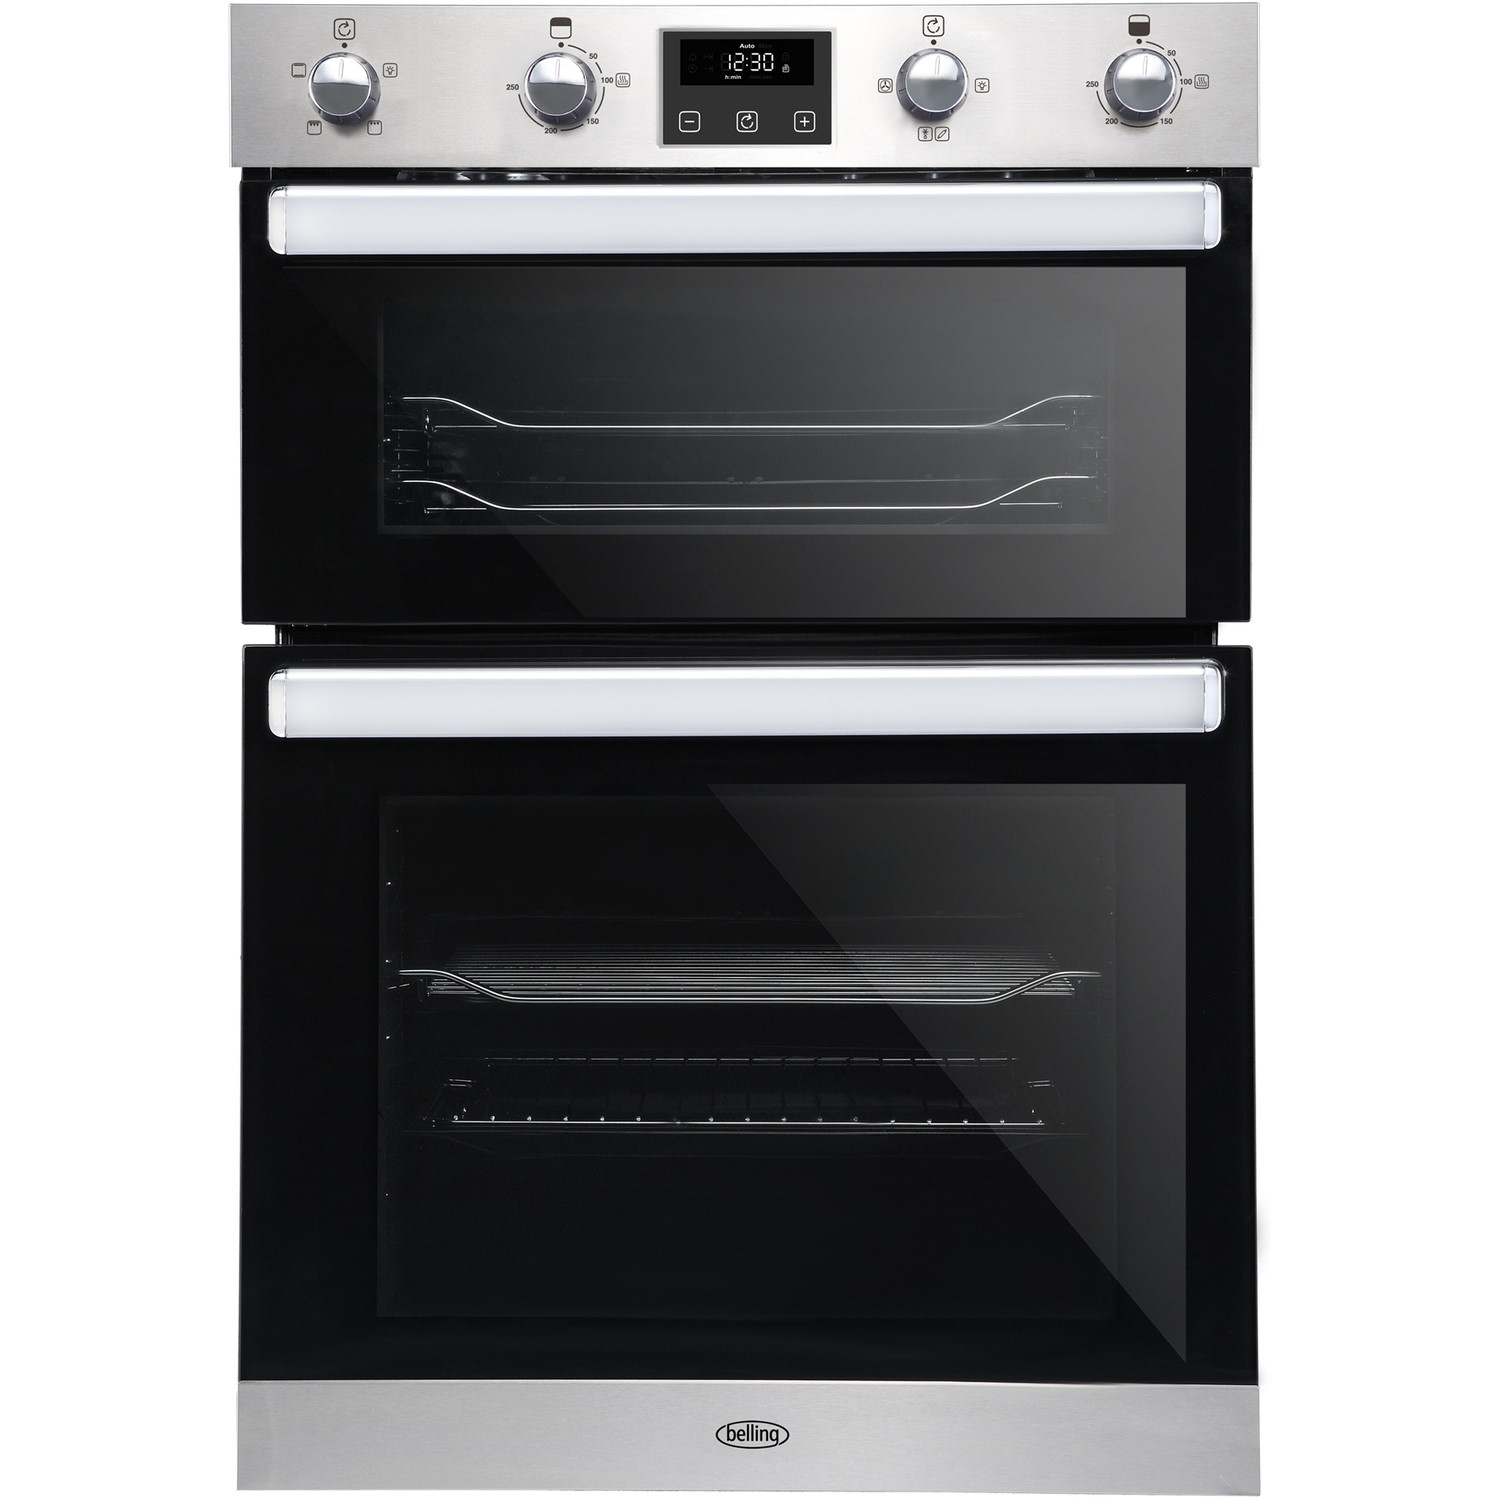 Belling BI902FP Built In Double Oven - Stainless Steel